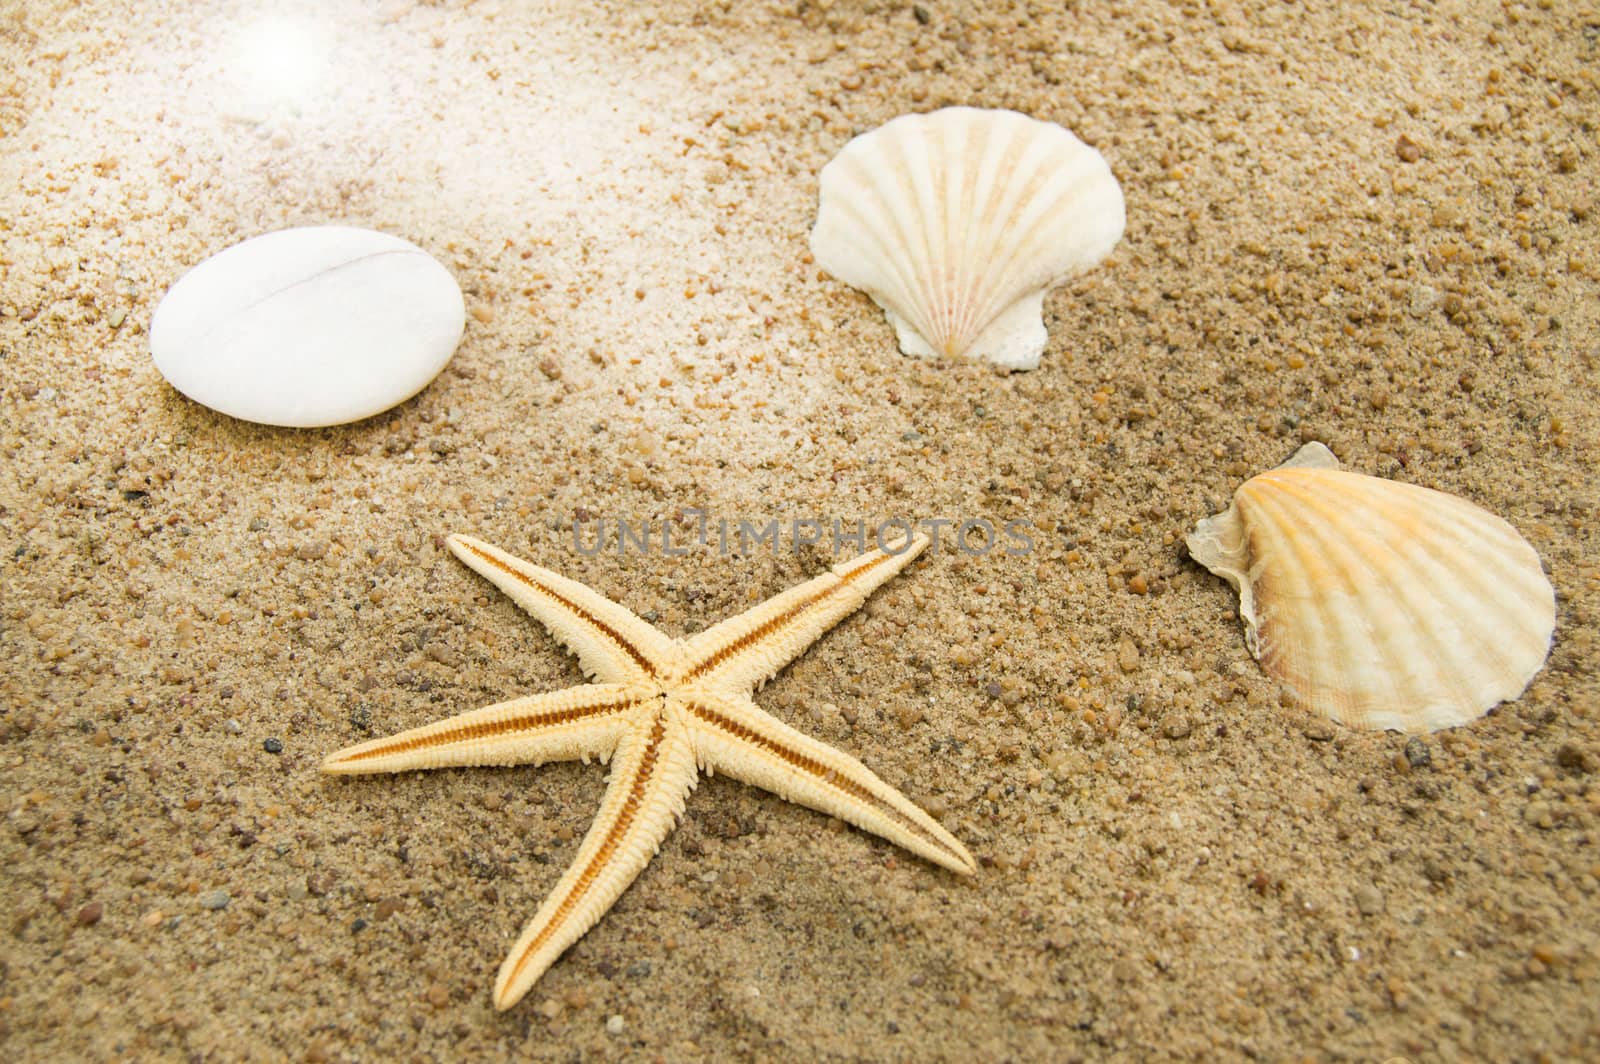 Concept of a beach holiday and travelling. Starfish, shells on the sandy beach.